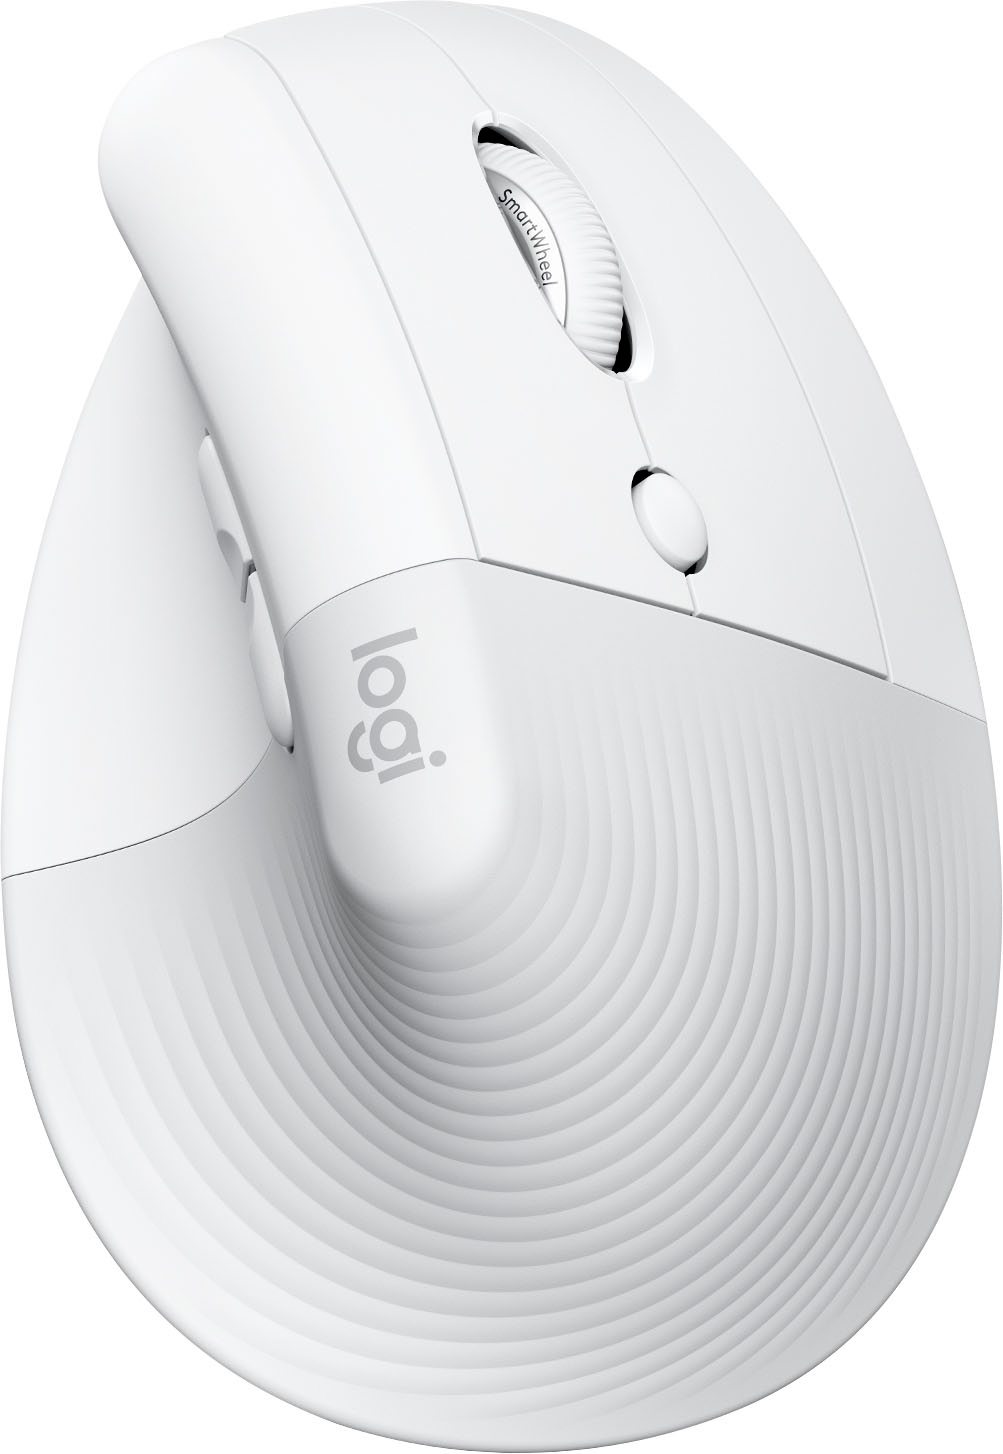 Citere kærlighed Vidner Logitech Lift for Mac Bluetooth Ergonomic Mouse with 4 Customizable Buttons  Off-White 910-006471 - Best Buy